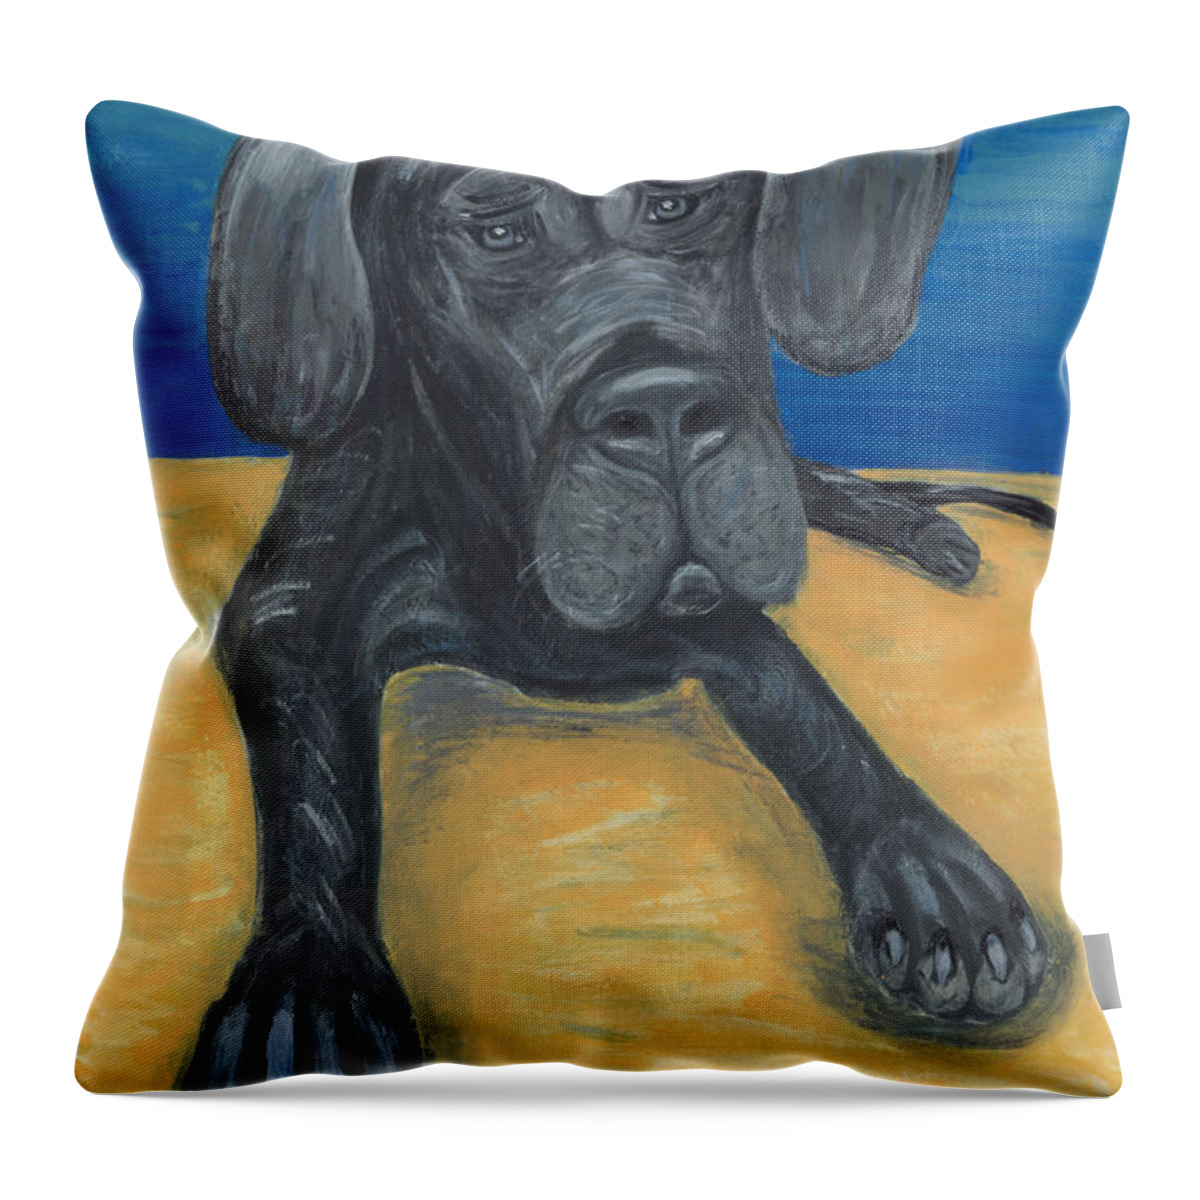 Great Dane Puppy Throw Pillow featuring the painting Blue The Great Dane Pup by Ania M Milo